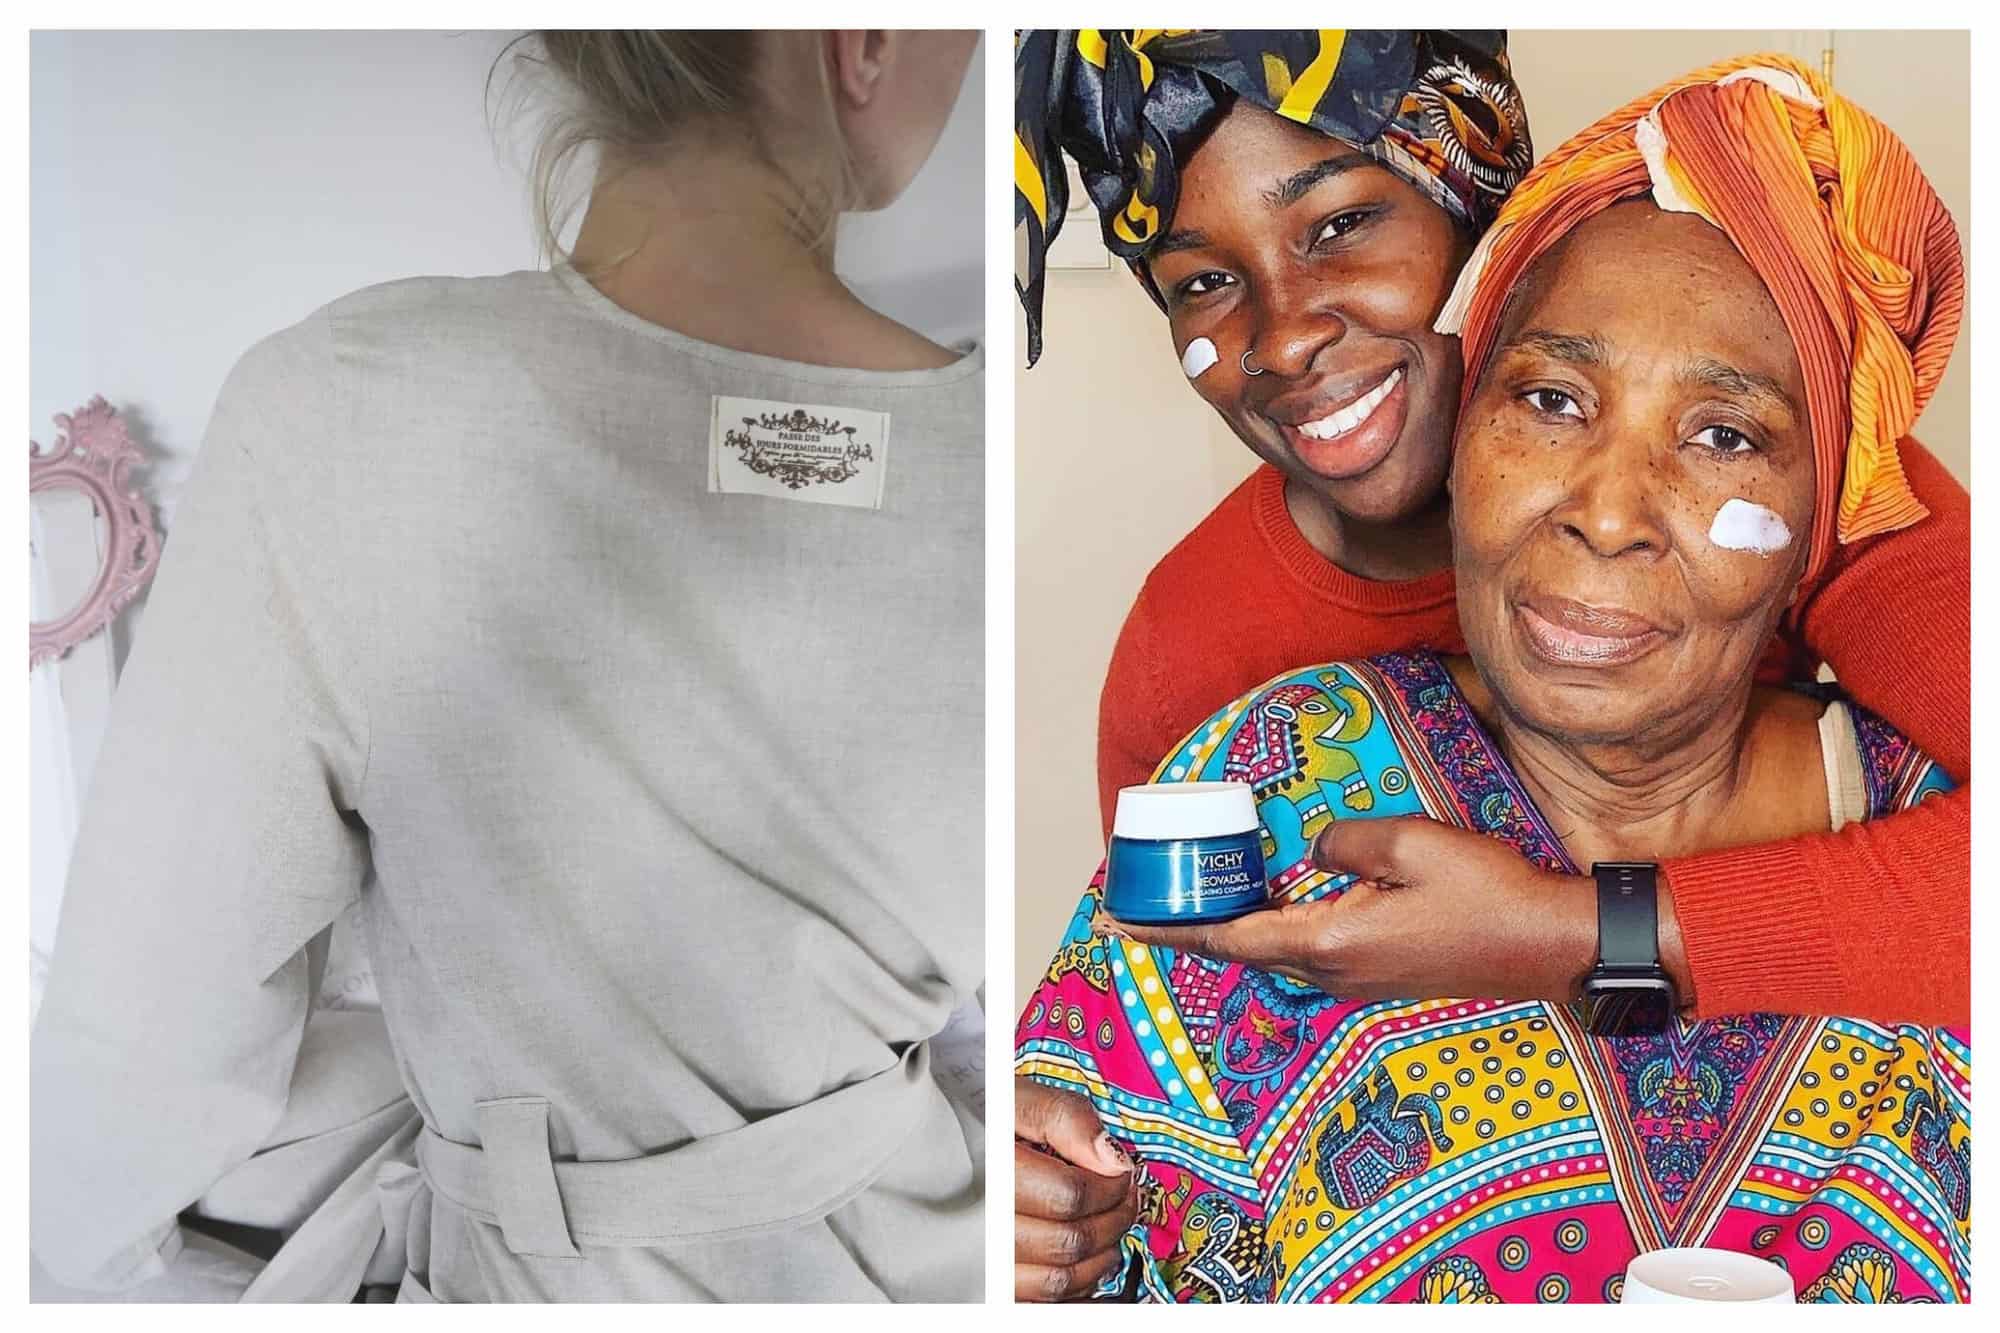 Left: A woman stands with her back facing the camera, wearing a grey robe. / Right: A young woman stand behind an older woman, with her arm wrapped around her, holding a container of face cream. They both have a line of face cream on their cheeks.